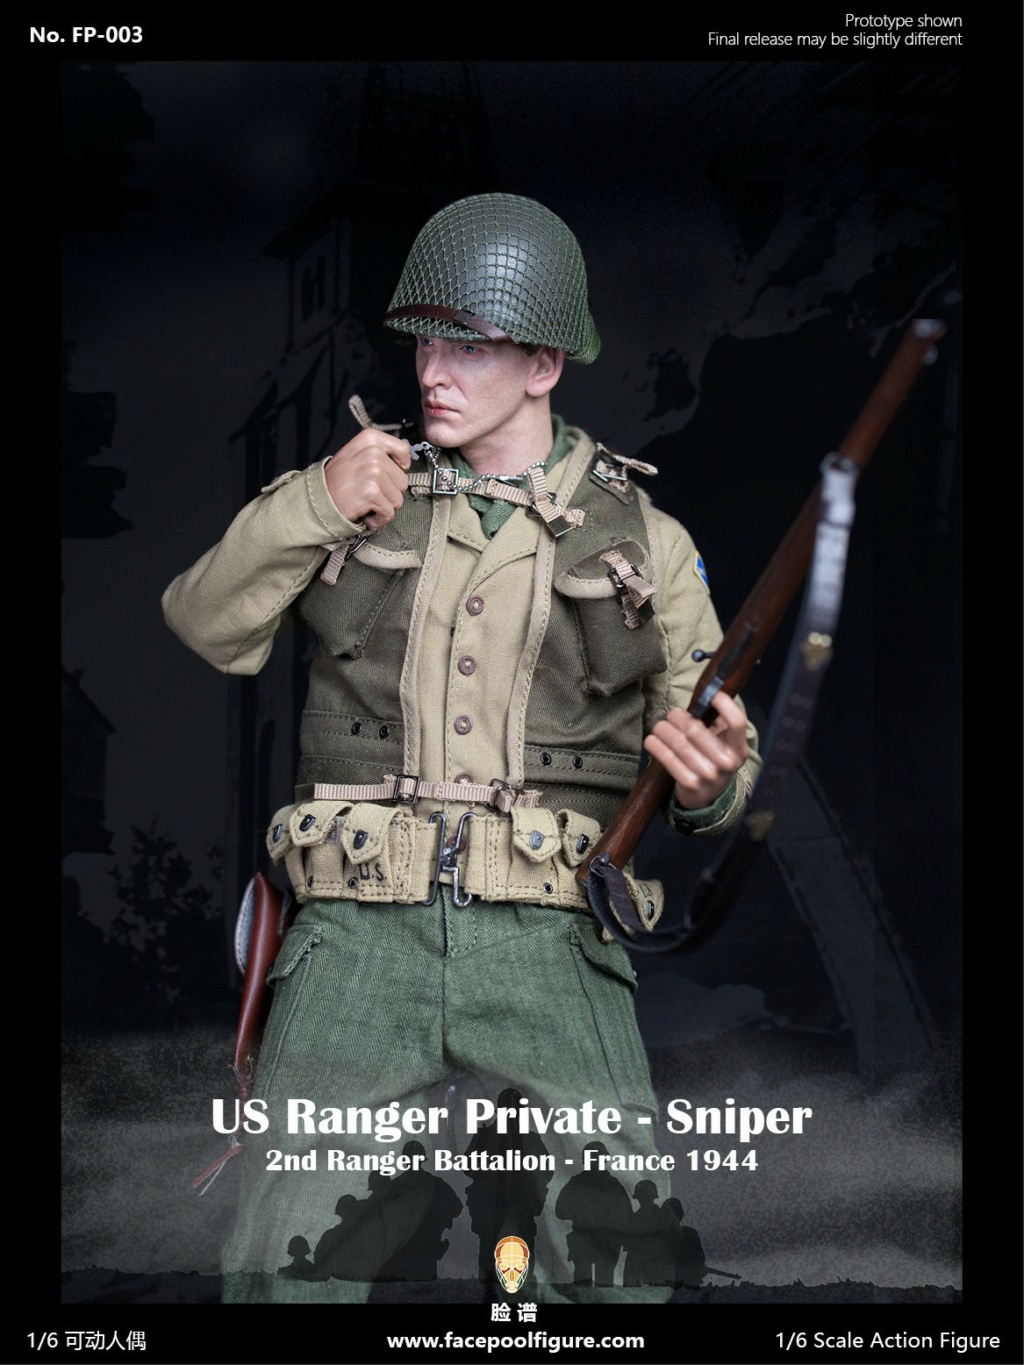 NEW PRODUCT: Facepool: 1/6 WWII Ranger Sniper FP003-Double-headed sculpture + bell tower platform  09173710